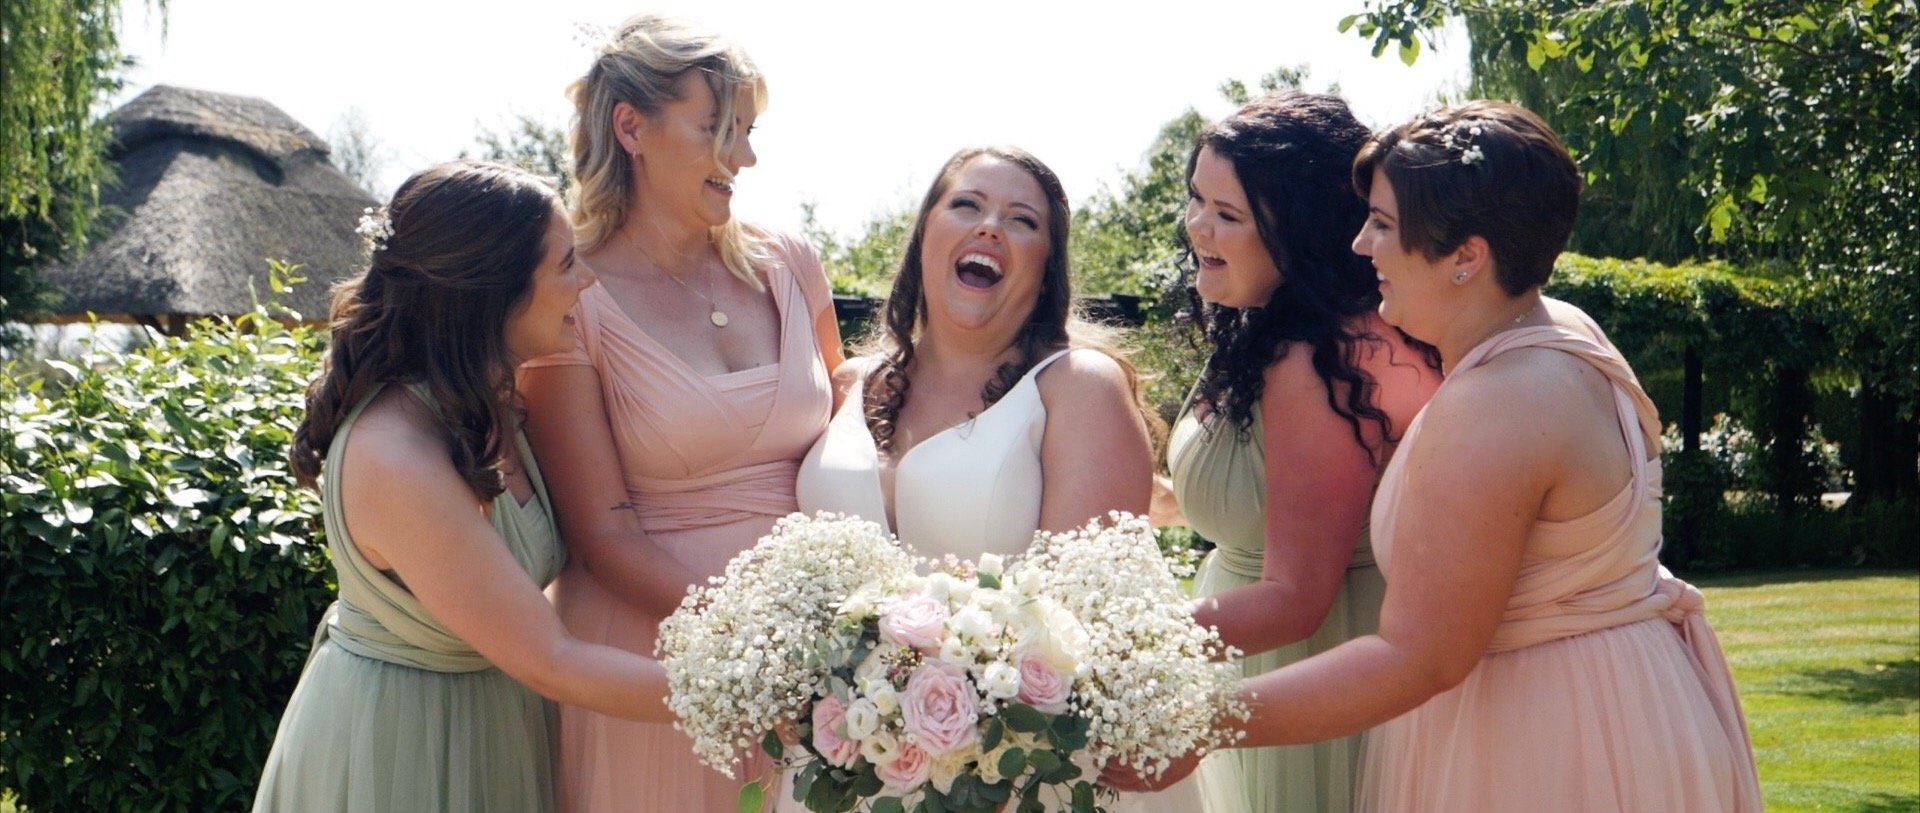 Bride and bridesmaids at High House Essex 3 Cheers Media videos.jpg